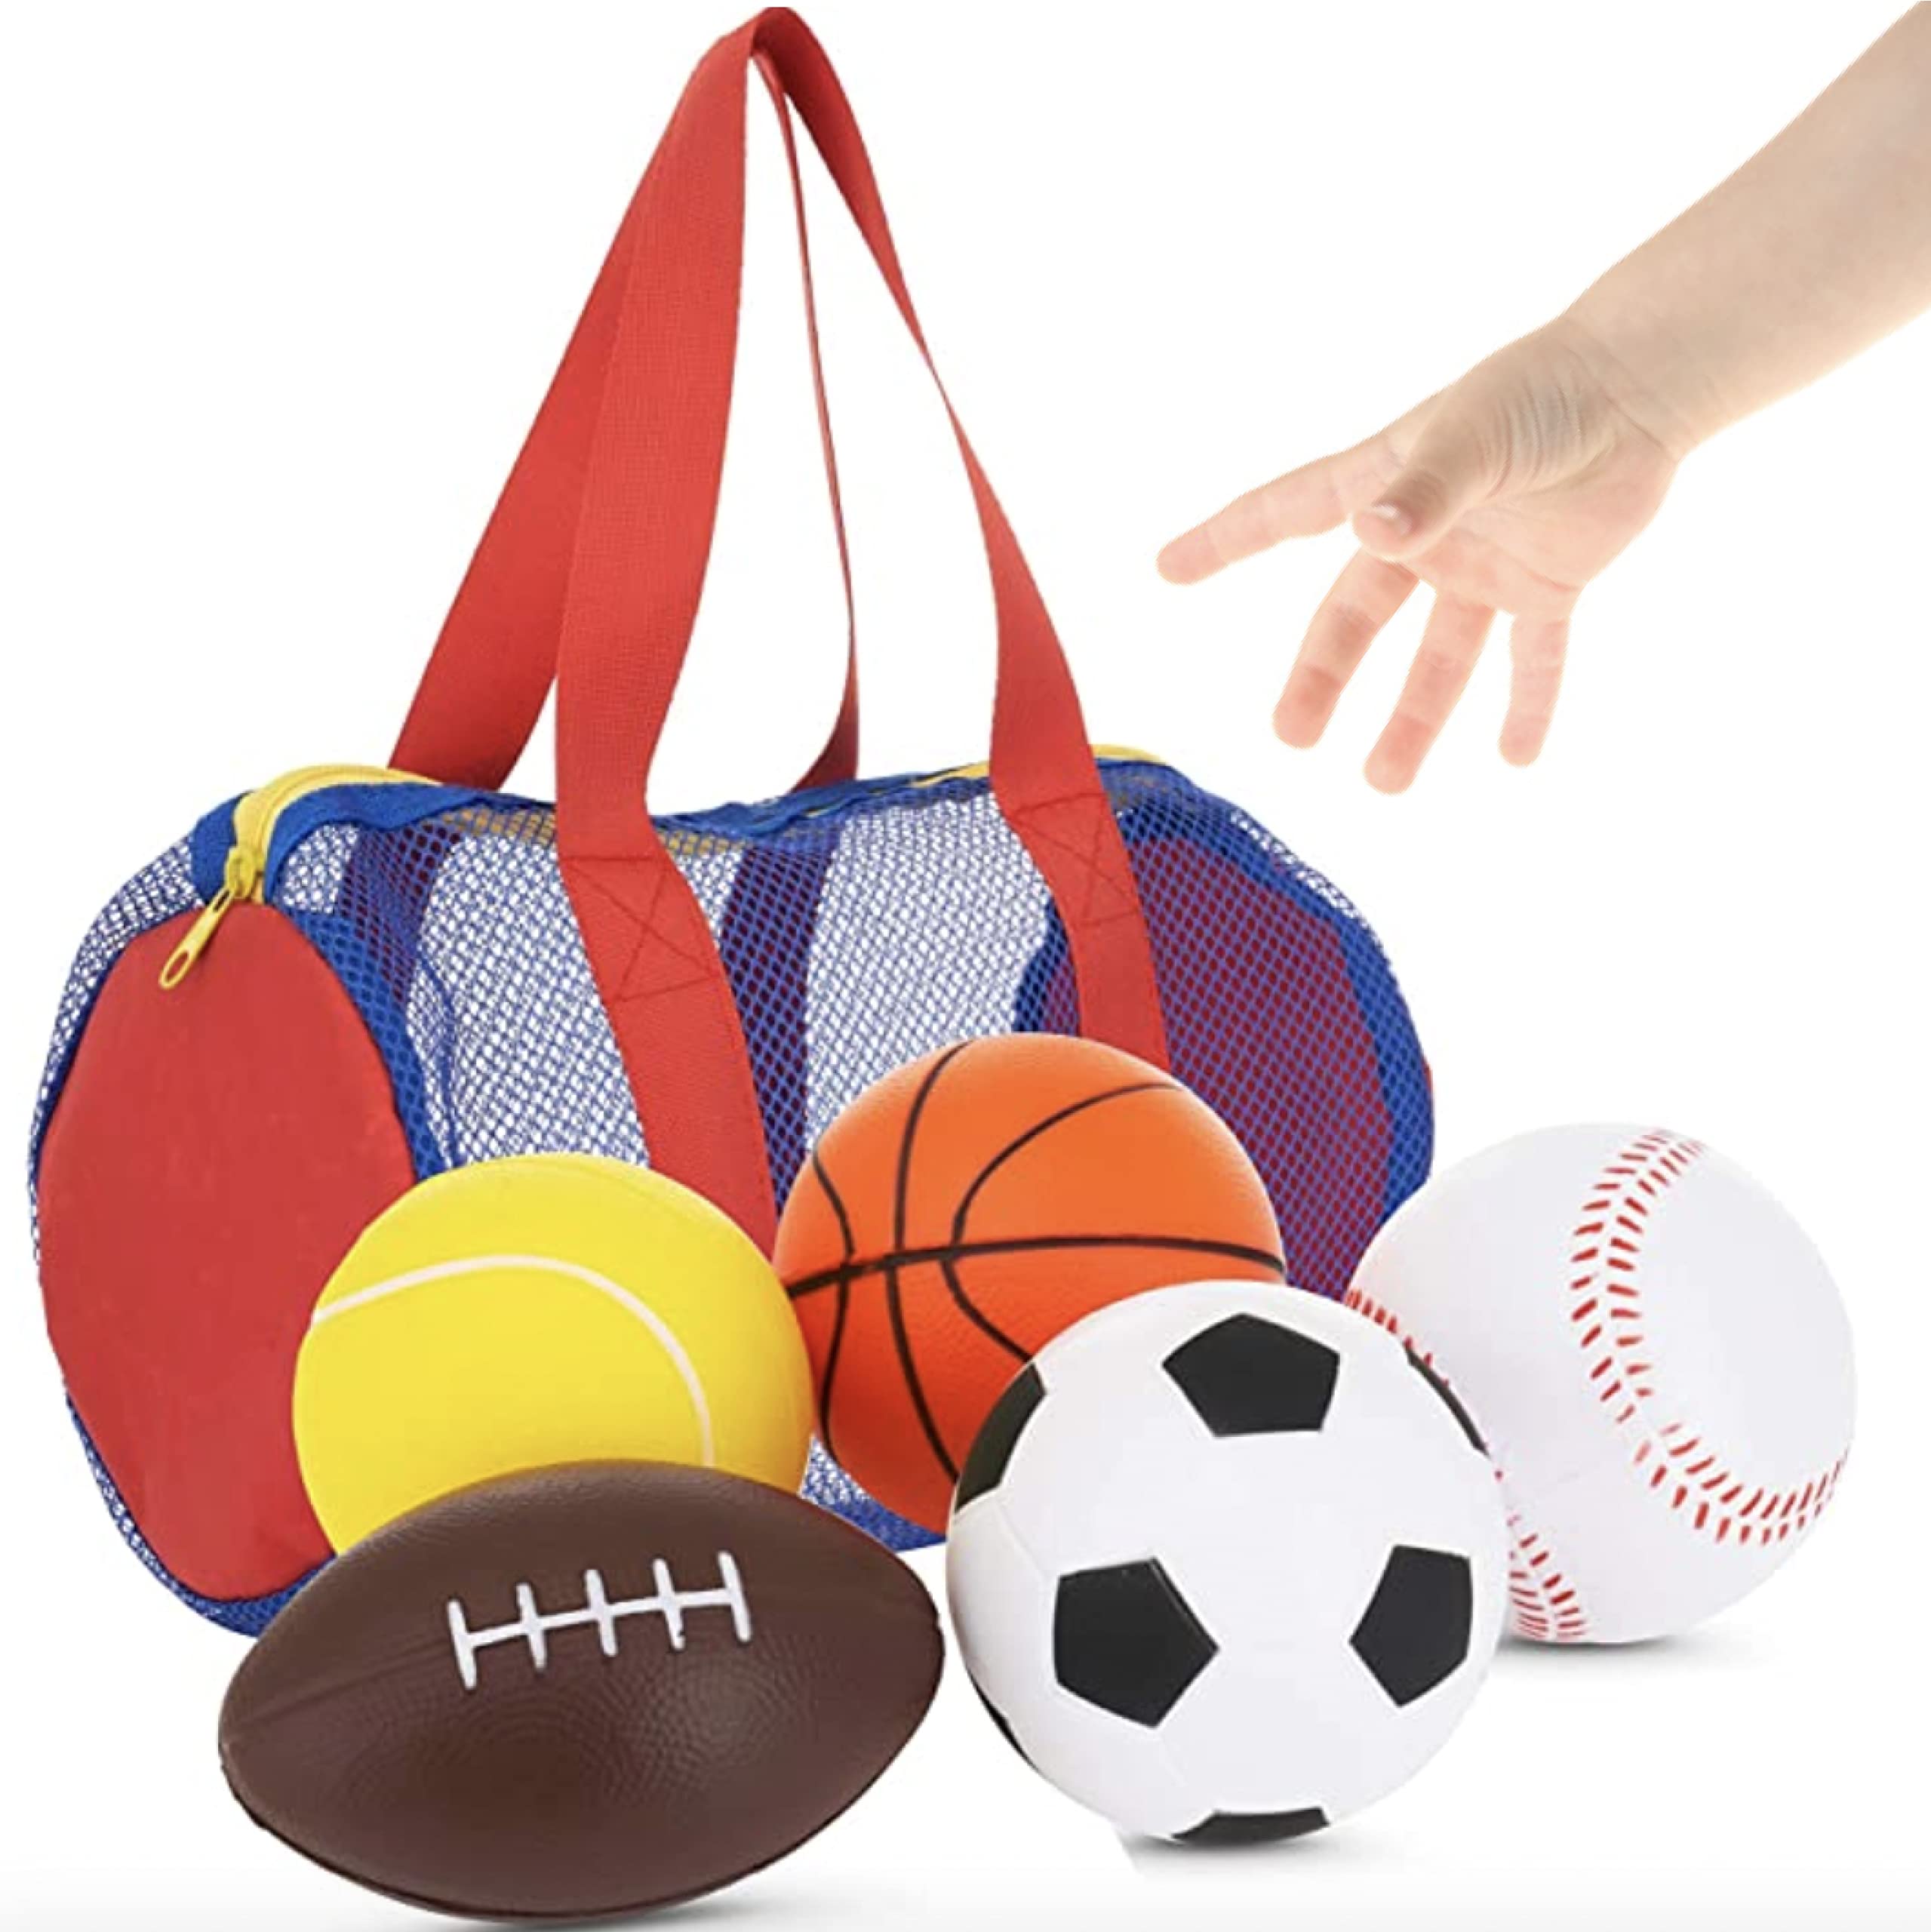 Foam Sports Soccer Balls Toys + FREE Bag - Set of 5 - Perfect for Small Hands to grab for Baby Kids, Toddler 1-3